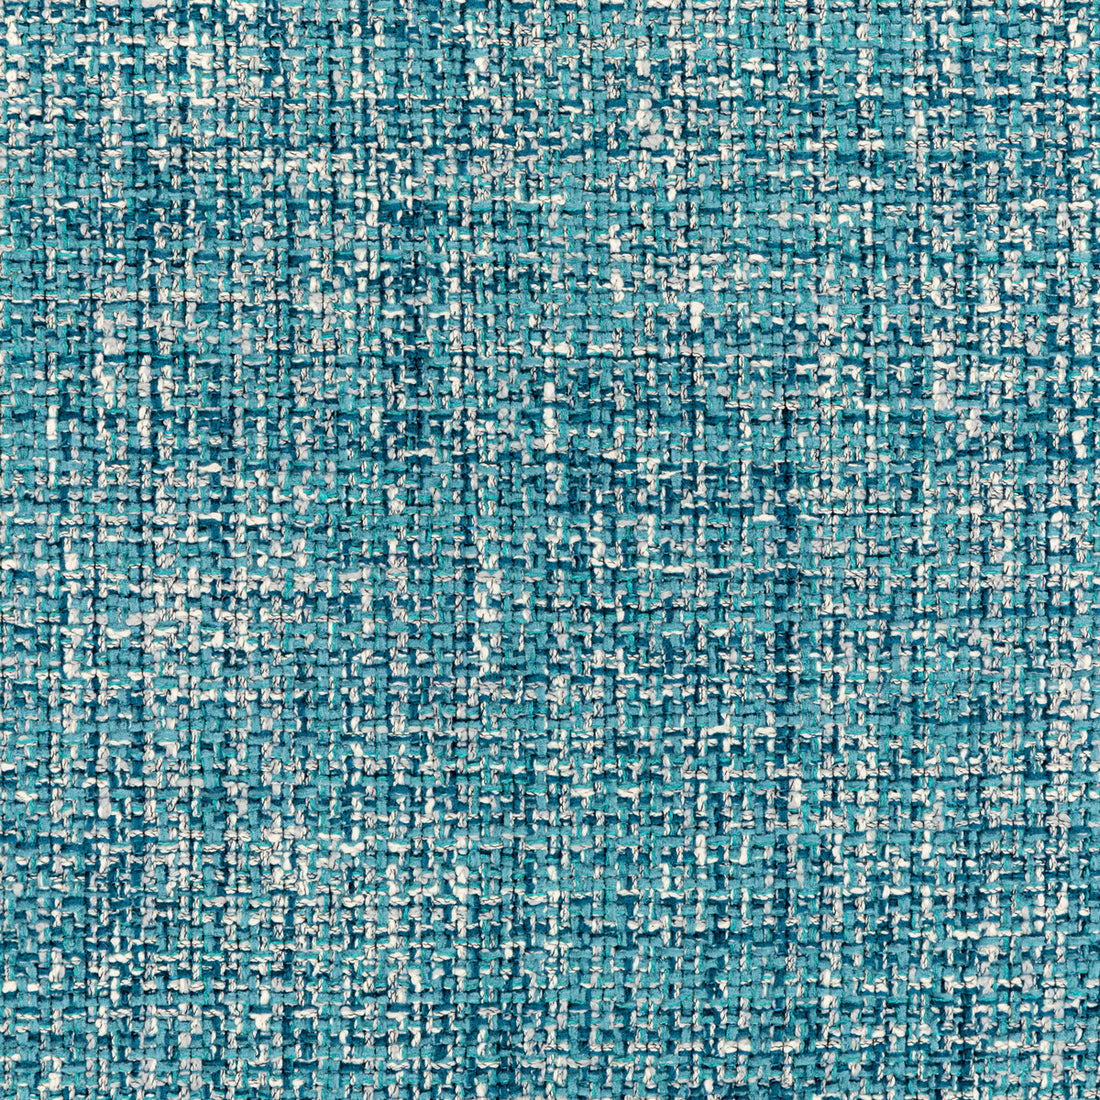 Tailored Plaid fabric in ocean color - pattern 36099.355.0 - by Kravet Couture in the Luxury Textures II collection